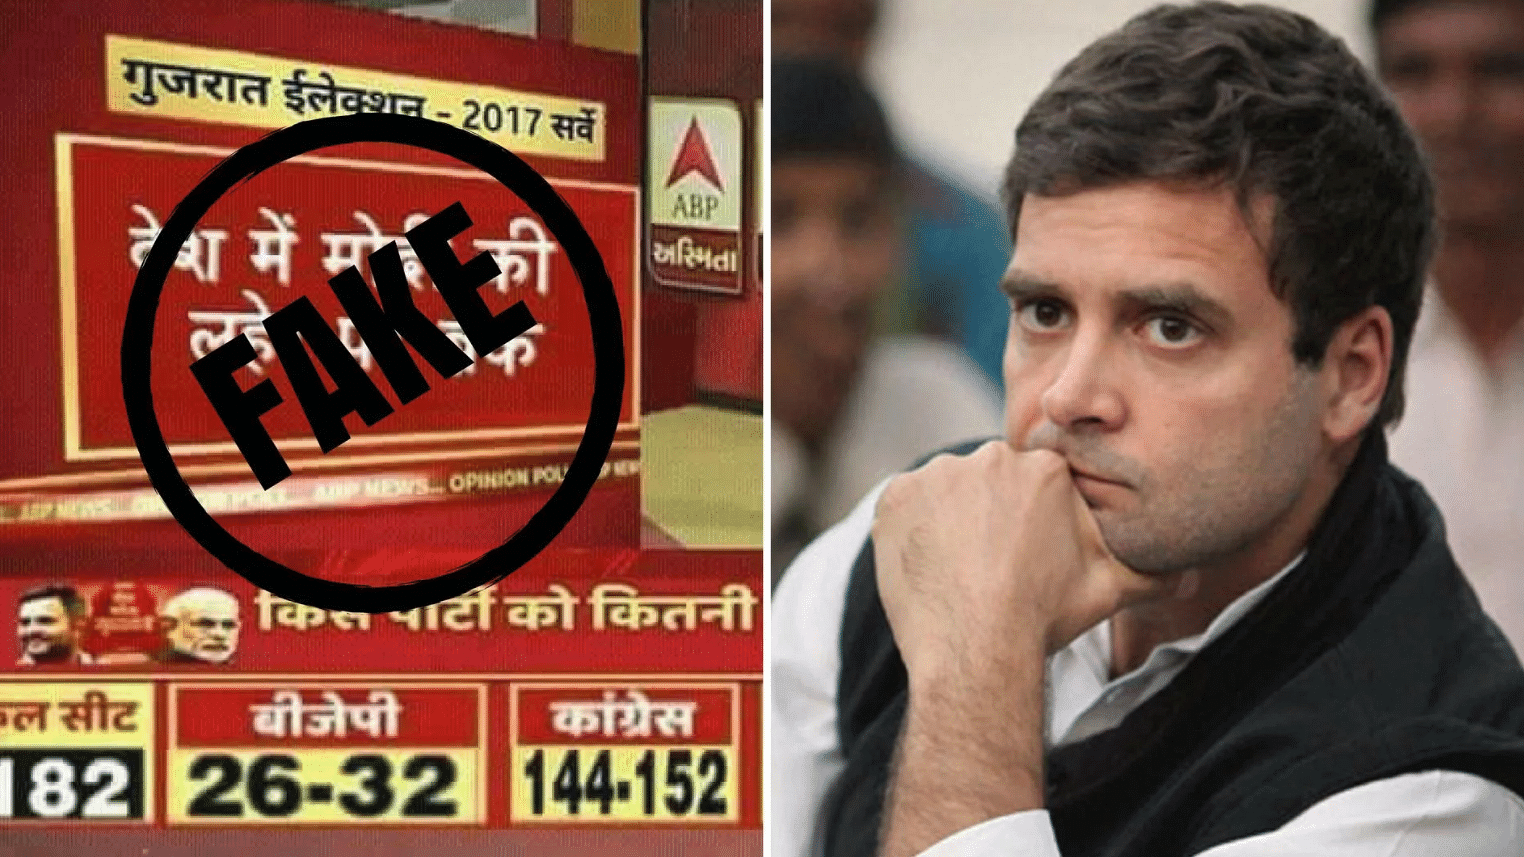 As Gujarat gears up for the much-awaited Assembly elections, a fake image has gone viral on the social media that predicts a big win for the Congress.